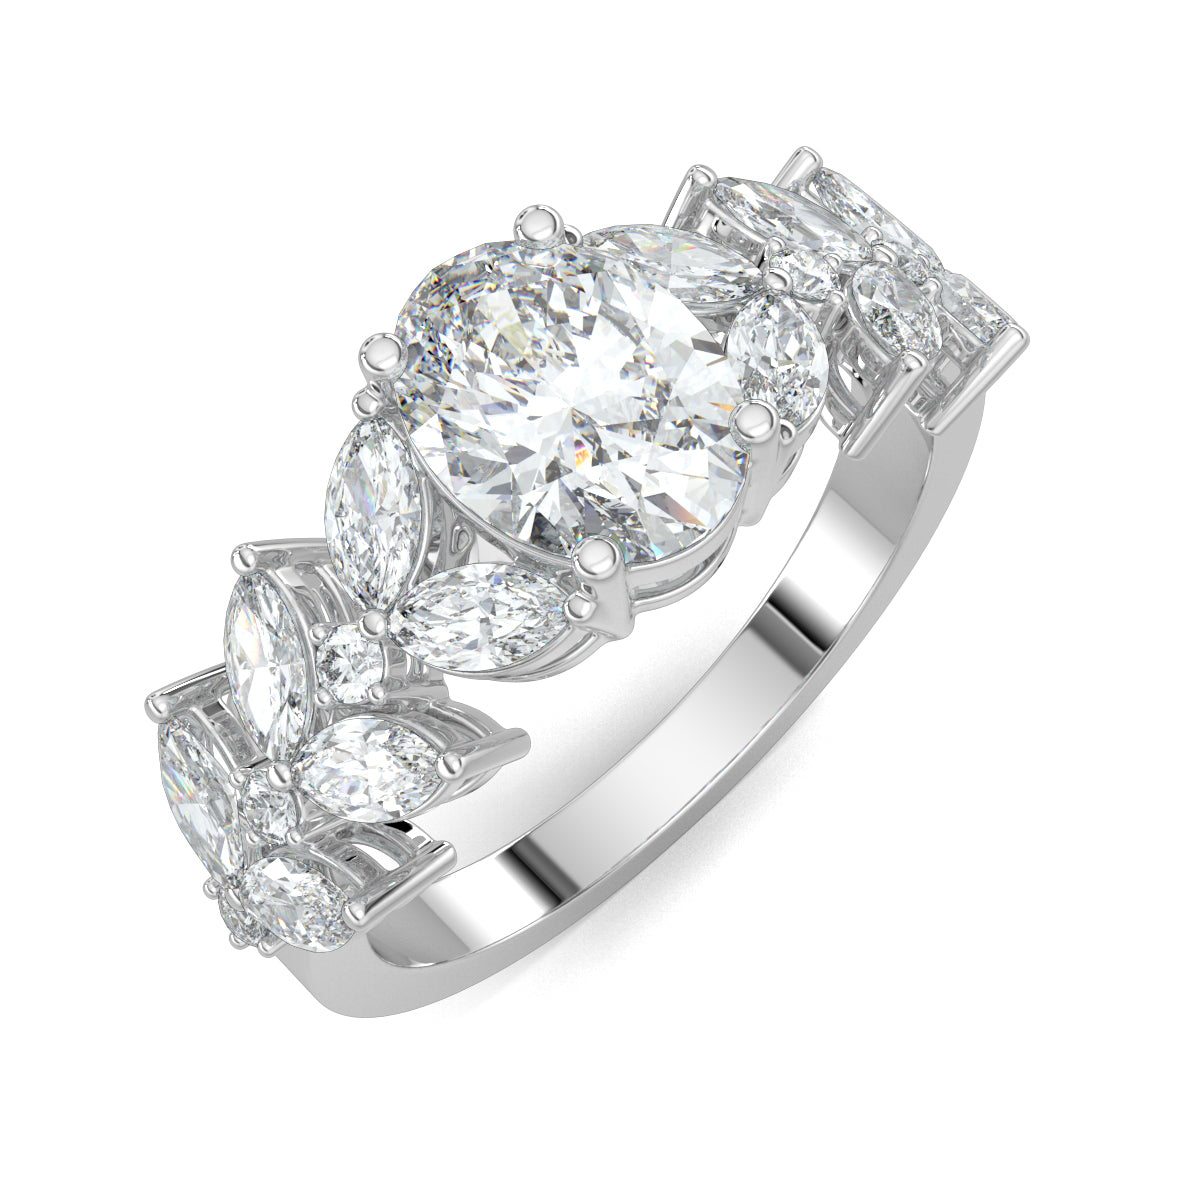 White Gold, Diamond Ring, Galactic Charm Solitaire Ring, Natural Diamonds, Lab-Grown Diamonds, Celestial Jewelry, Oval Cut Diamond, Marquise Cut Diamonds, Classic Band Ring